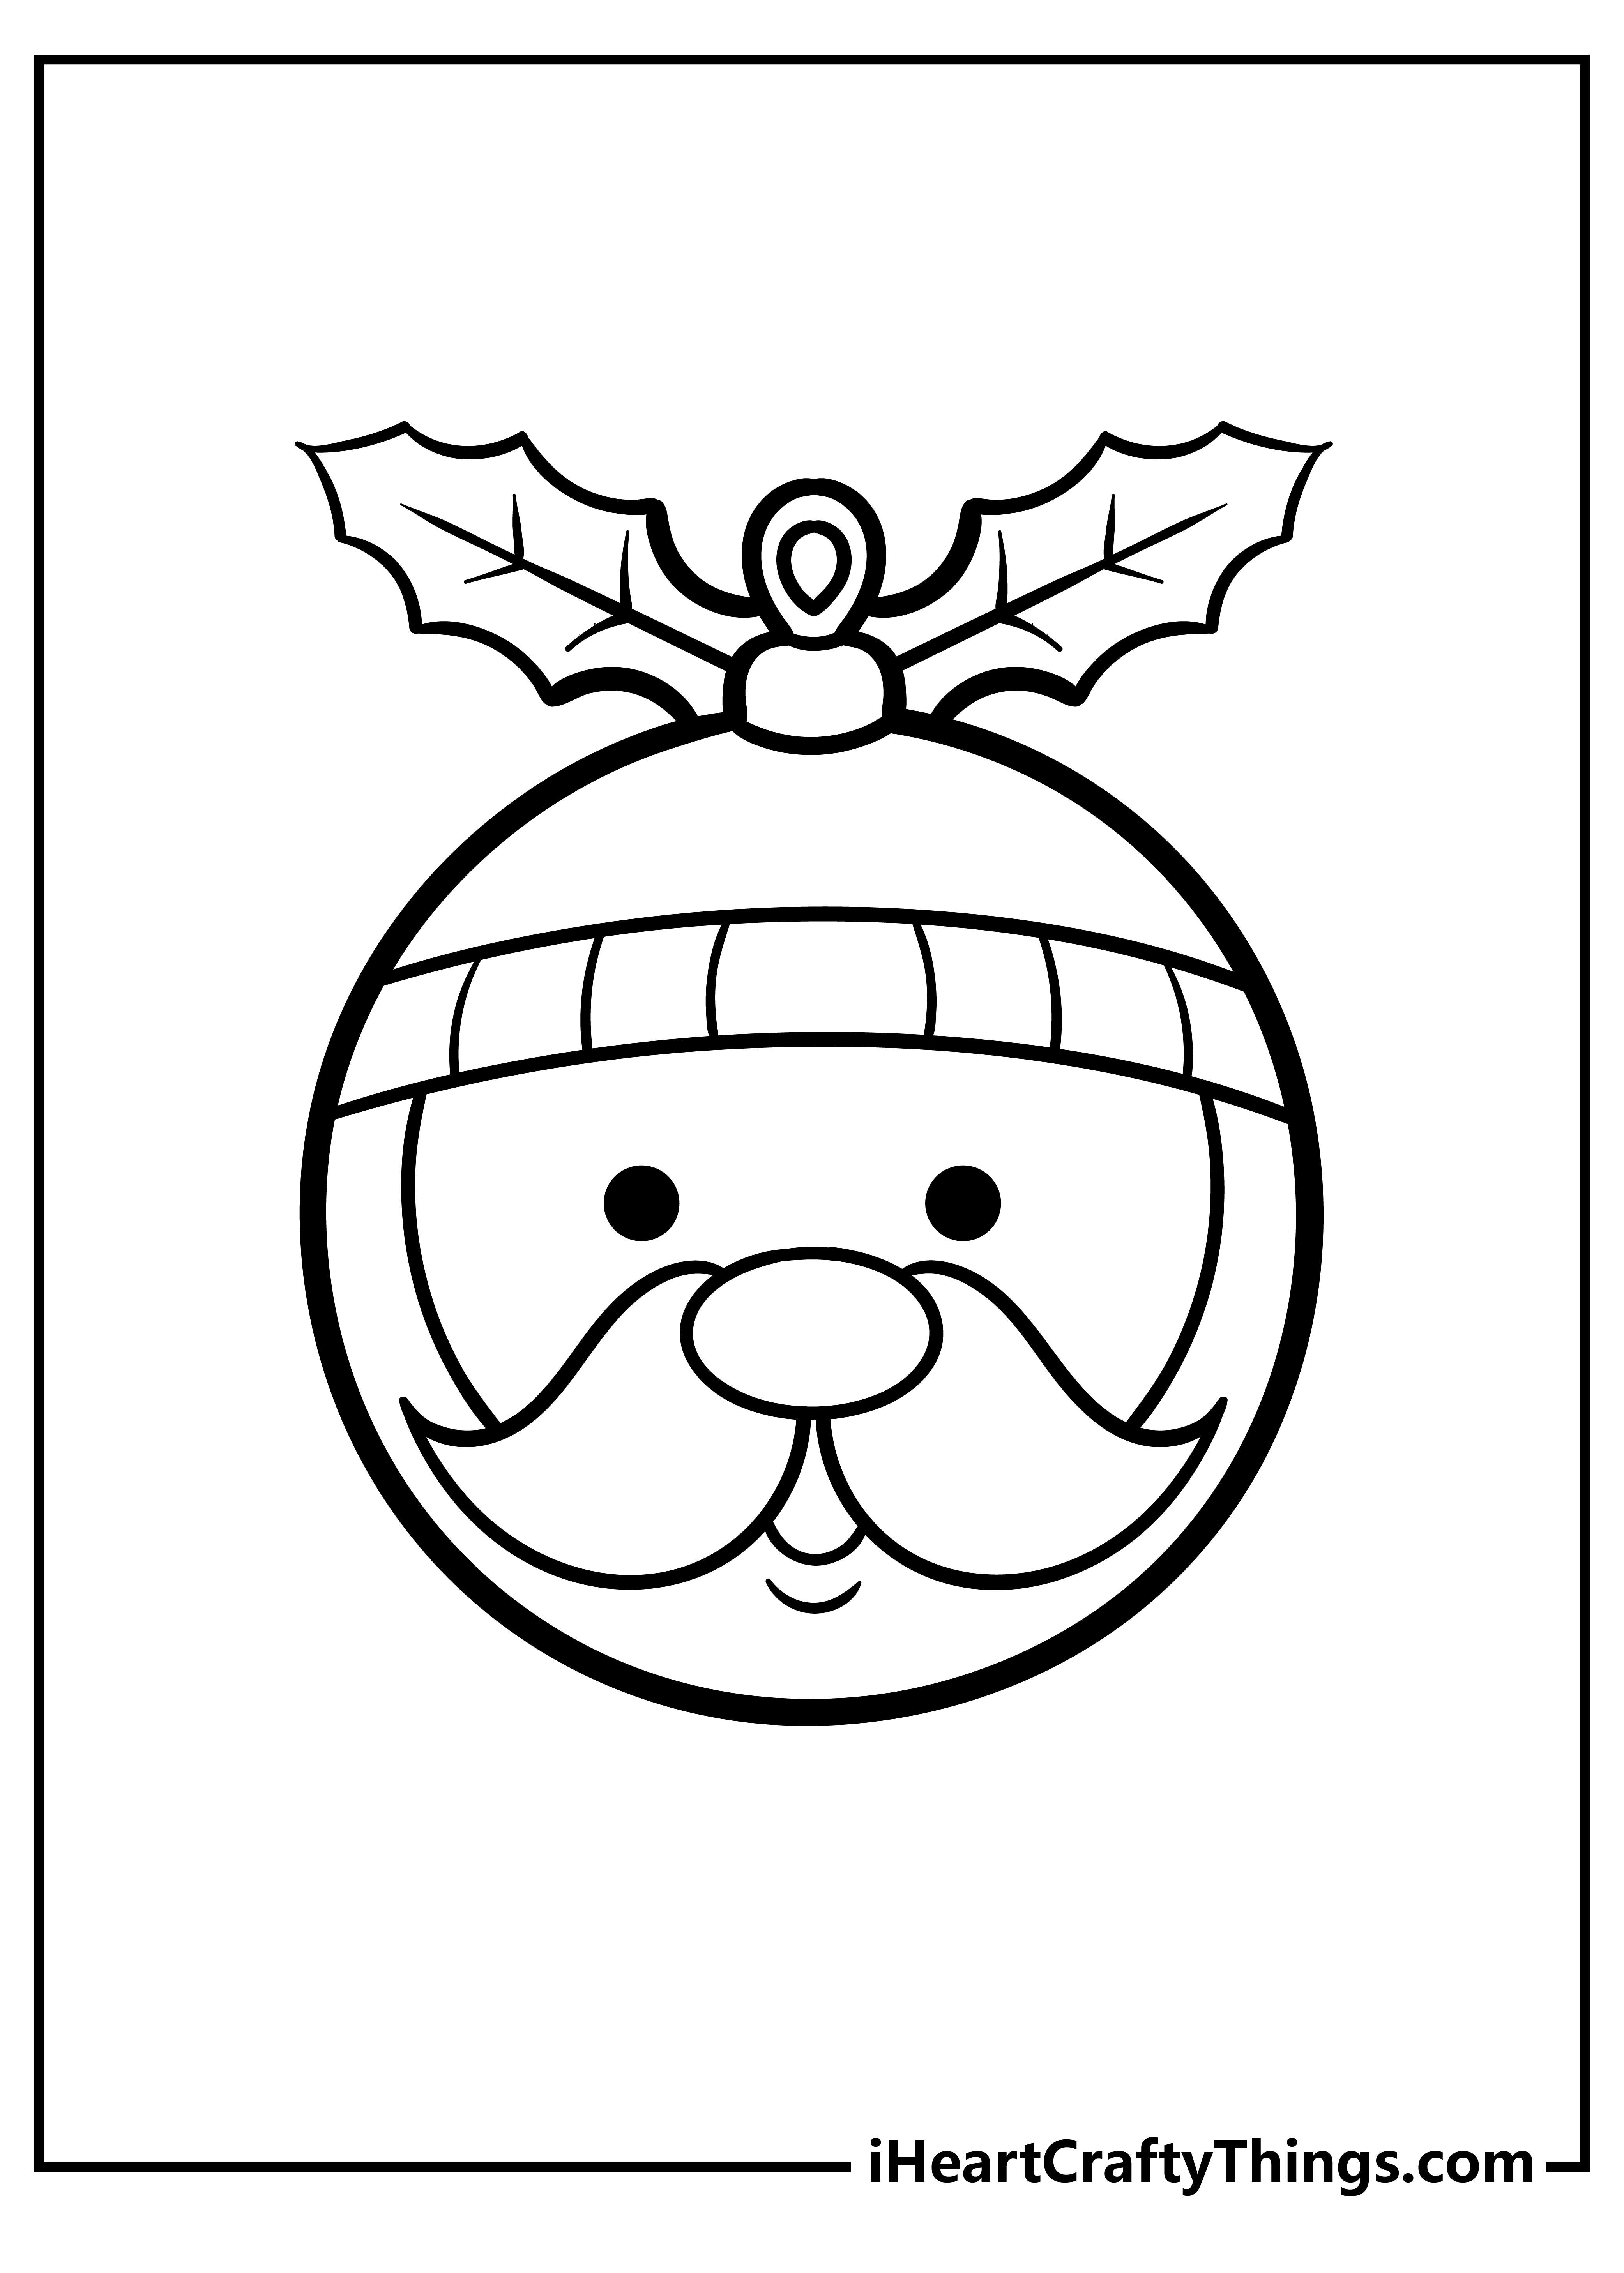 Printable Christmas Ornament Coloring Pages Updated 20